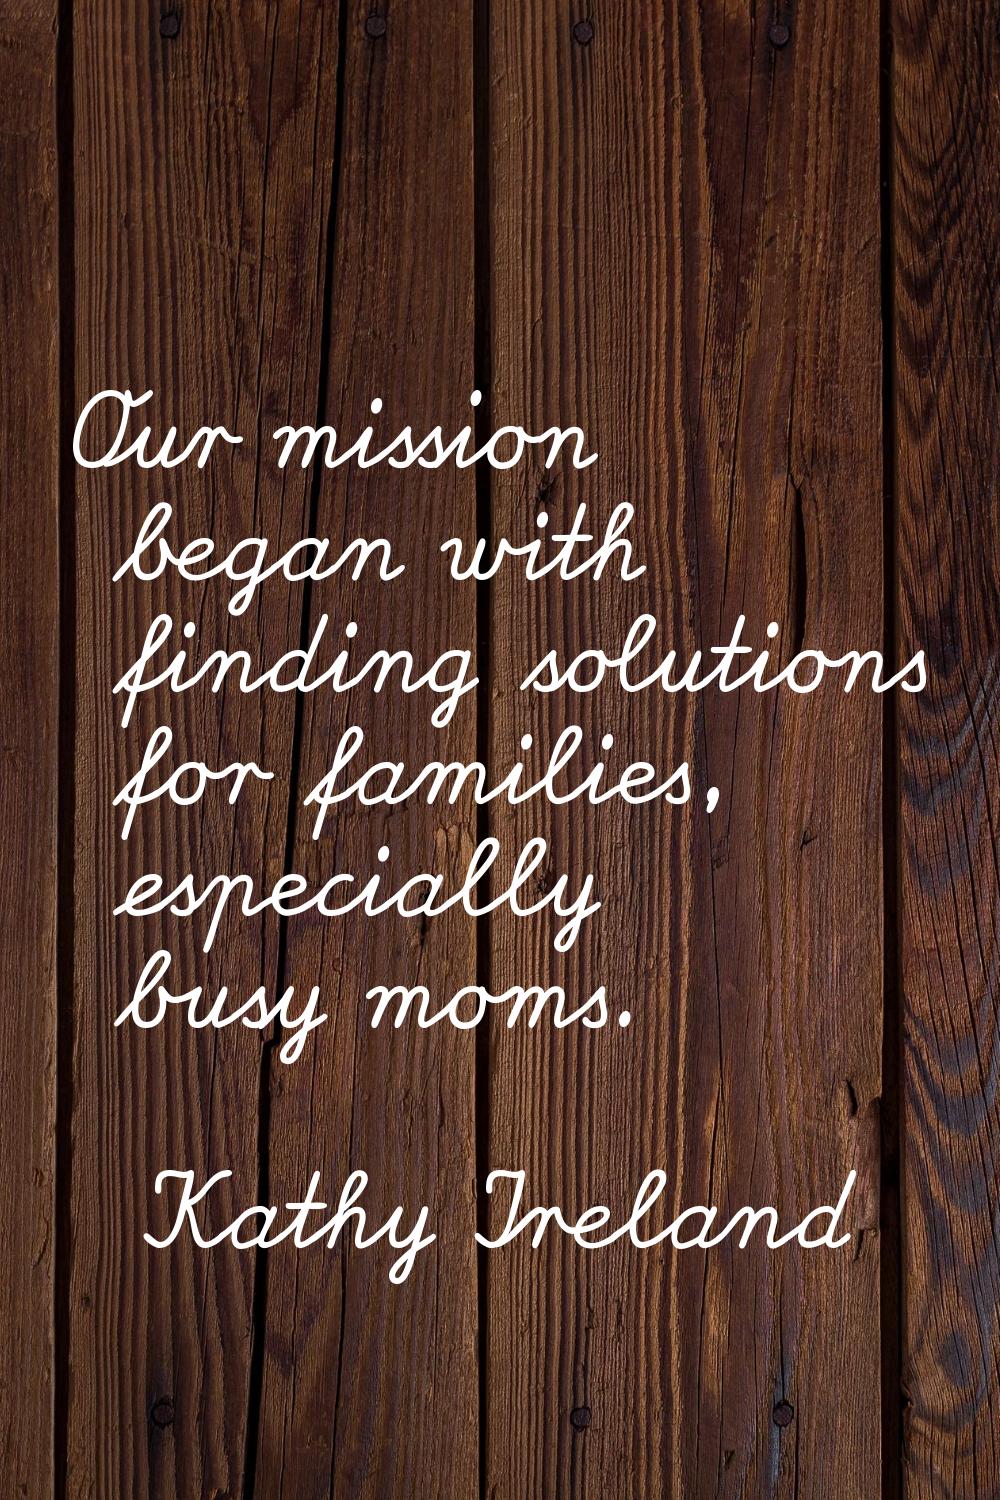 Our mission began with finding solutions for families, especially busy moms.